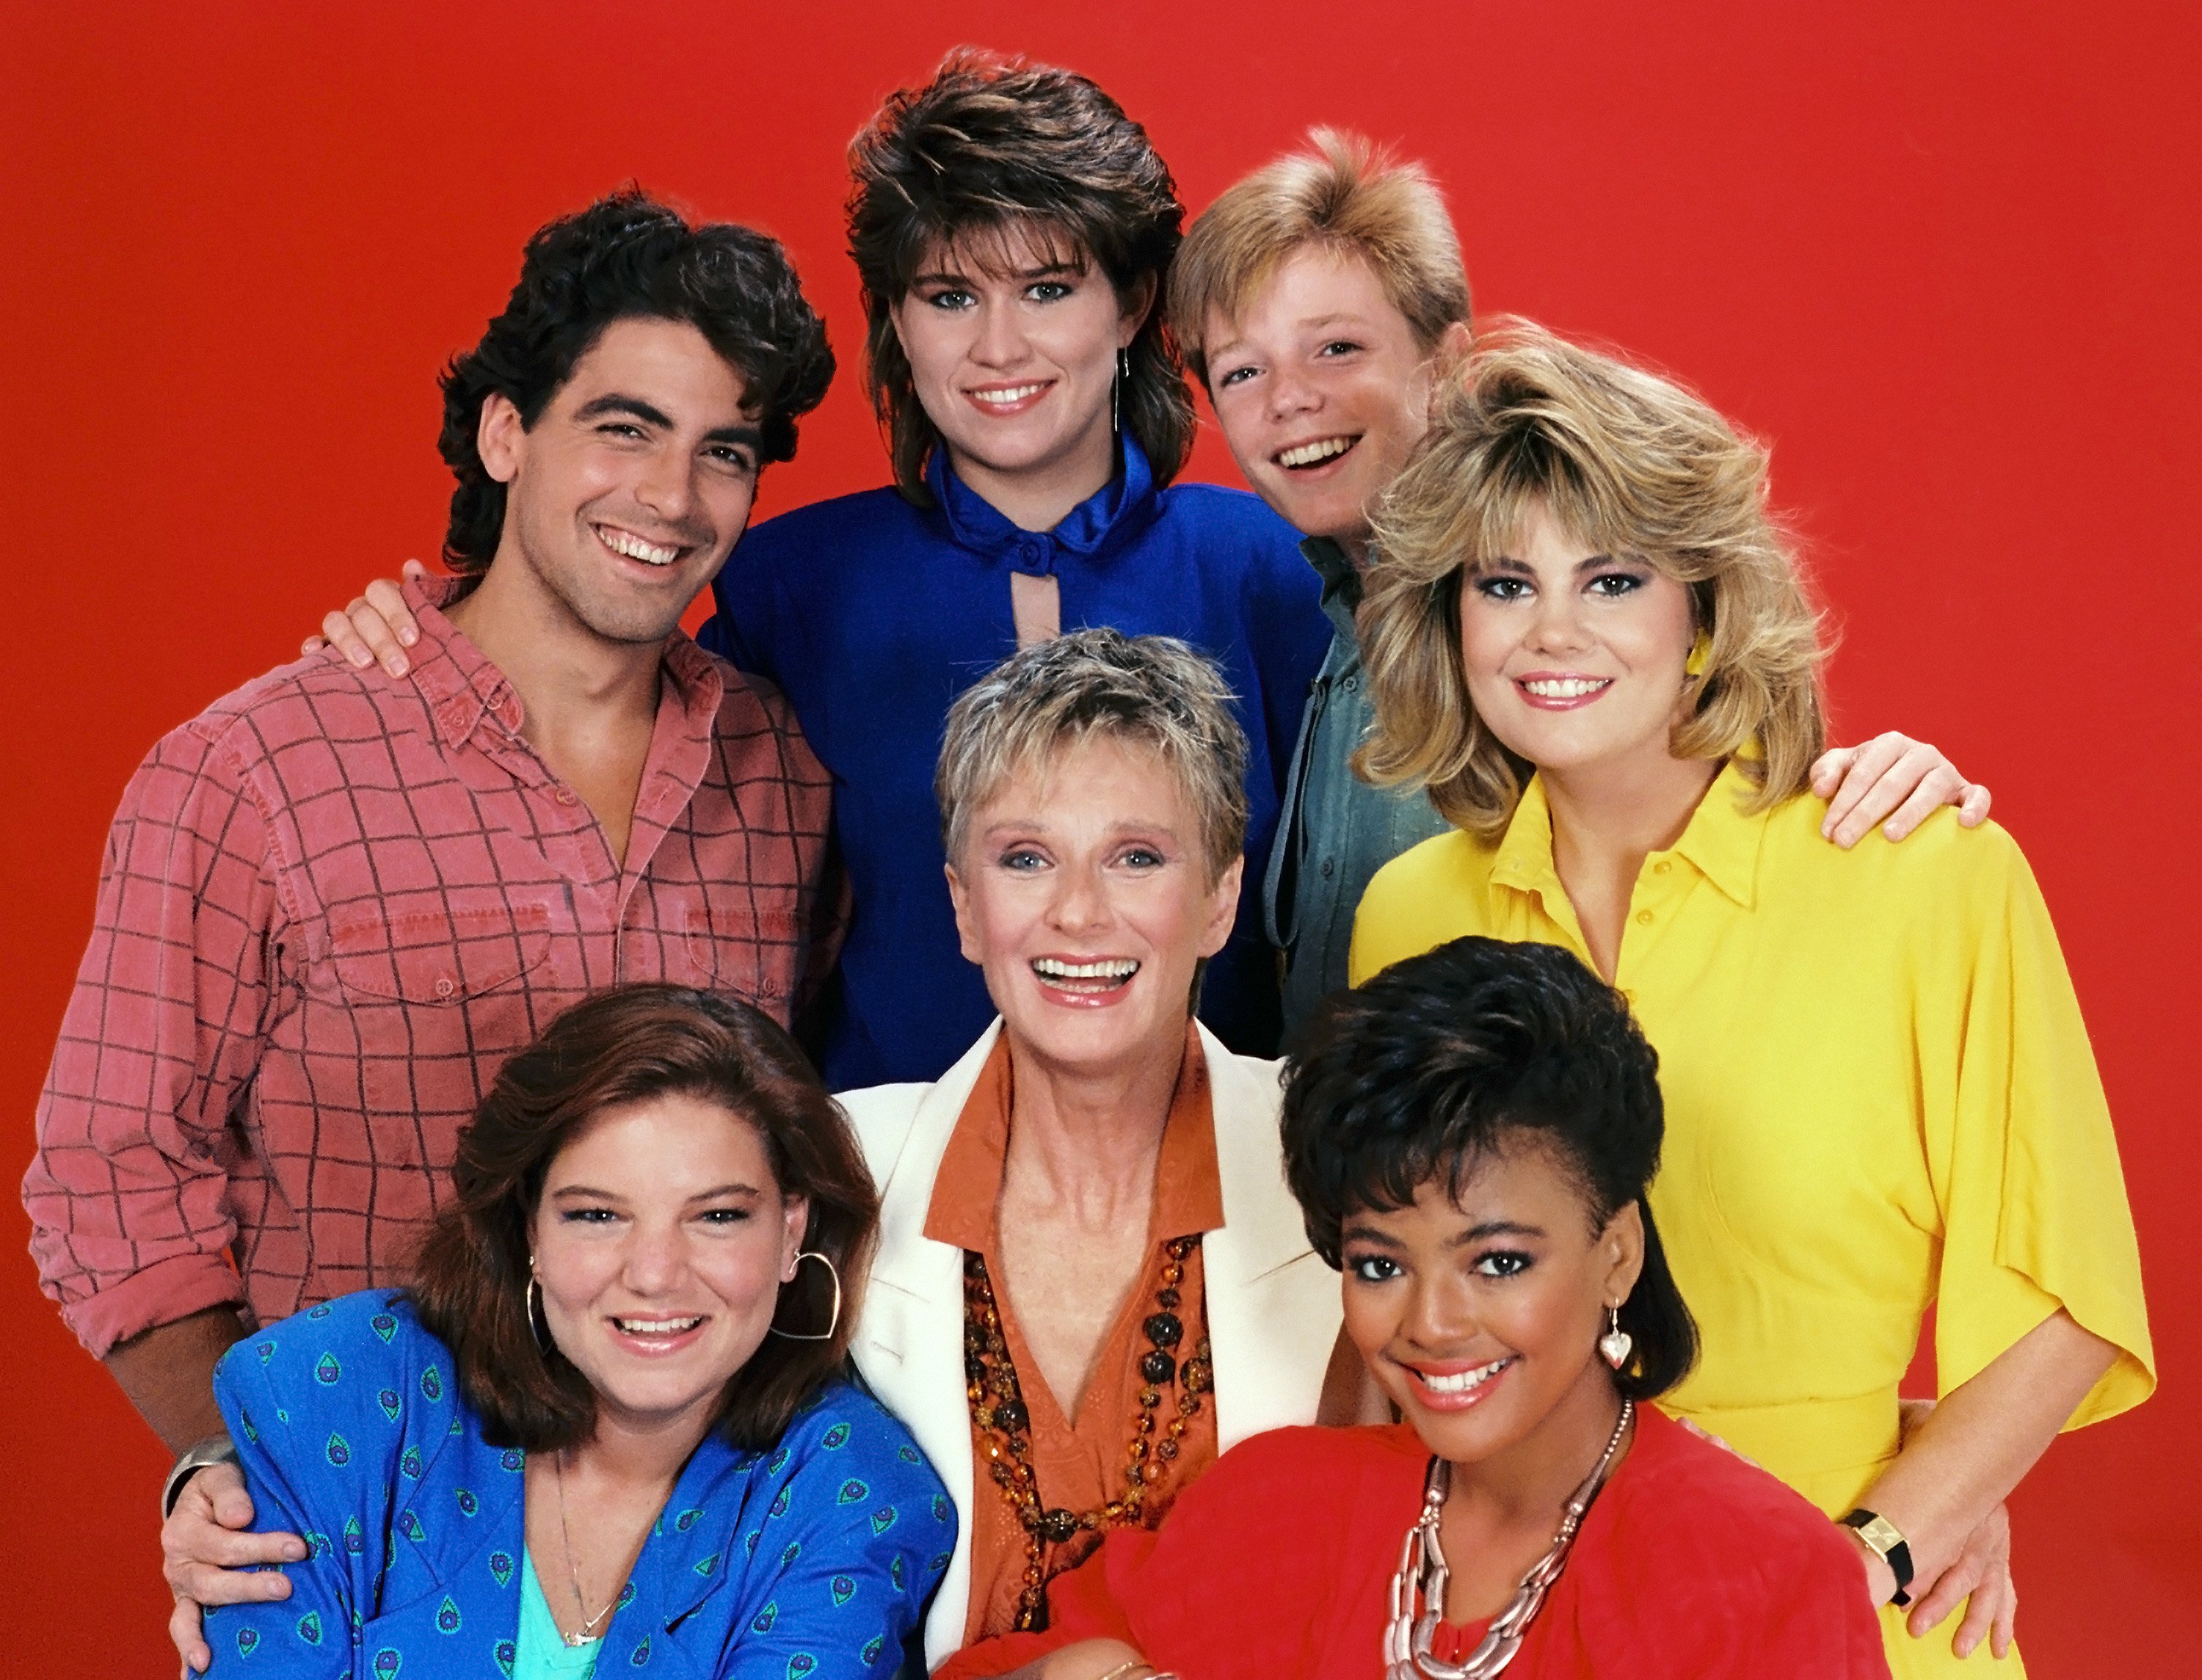 From left: George Clooney, Nancy McKeon, Mackenzie Astin, Lisa Whelchel, Kim Fields, Mindy Cohn, and Cloris Leachman in the middle in a promotional photo for "The Facts of Life" | Source: Getty Images